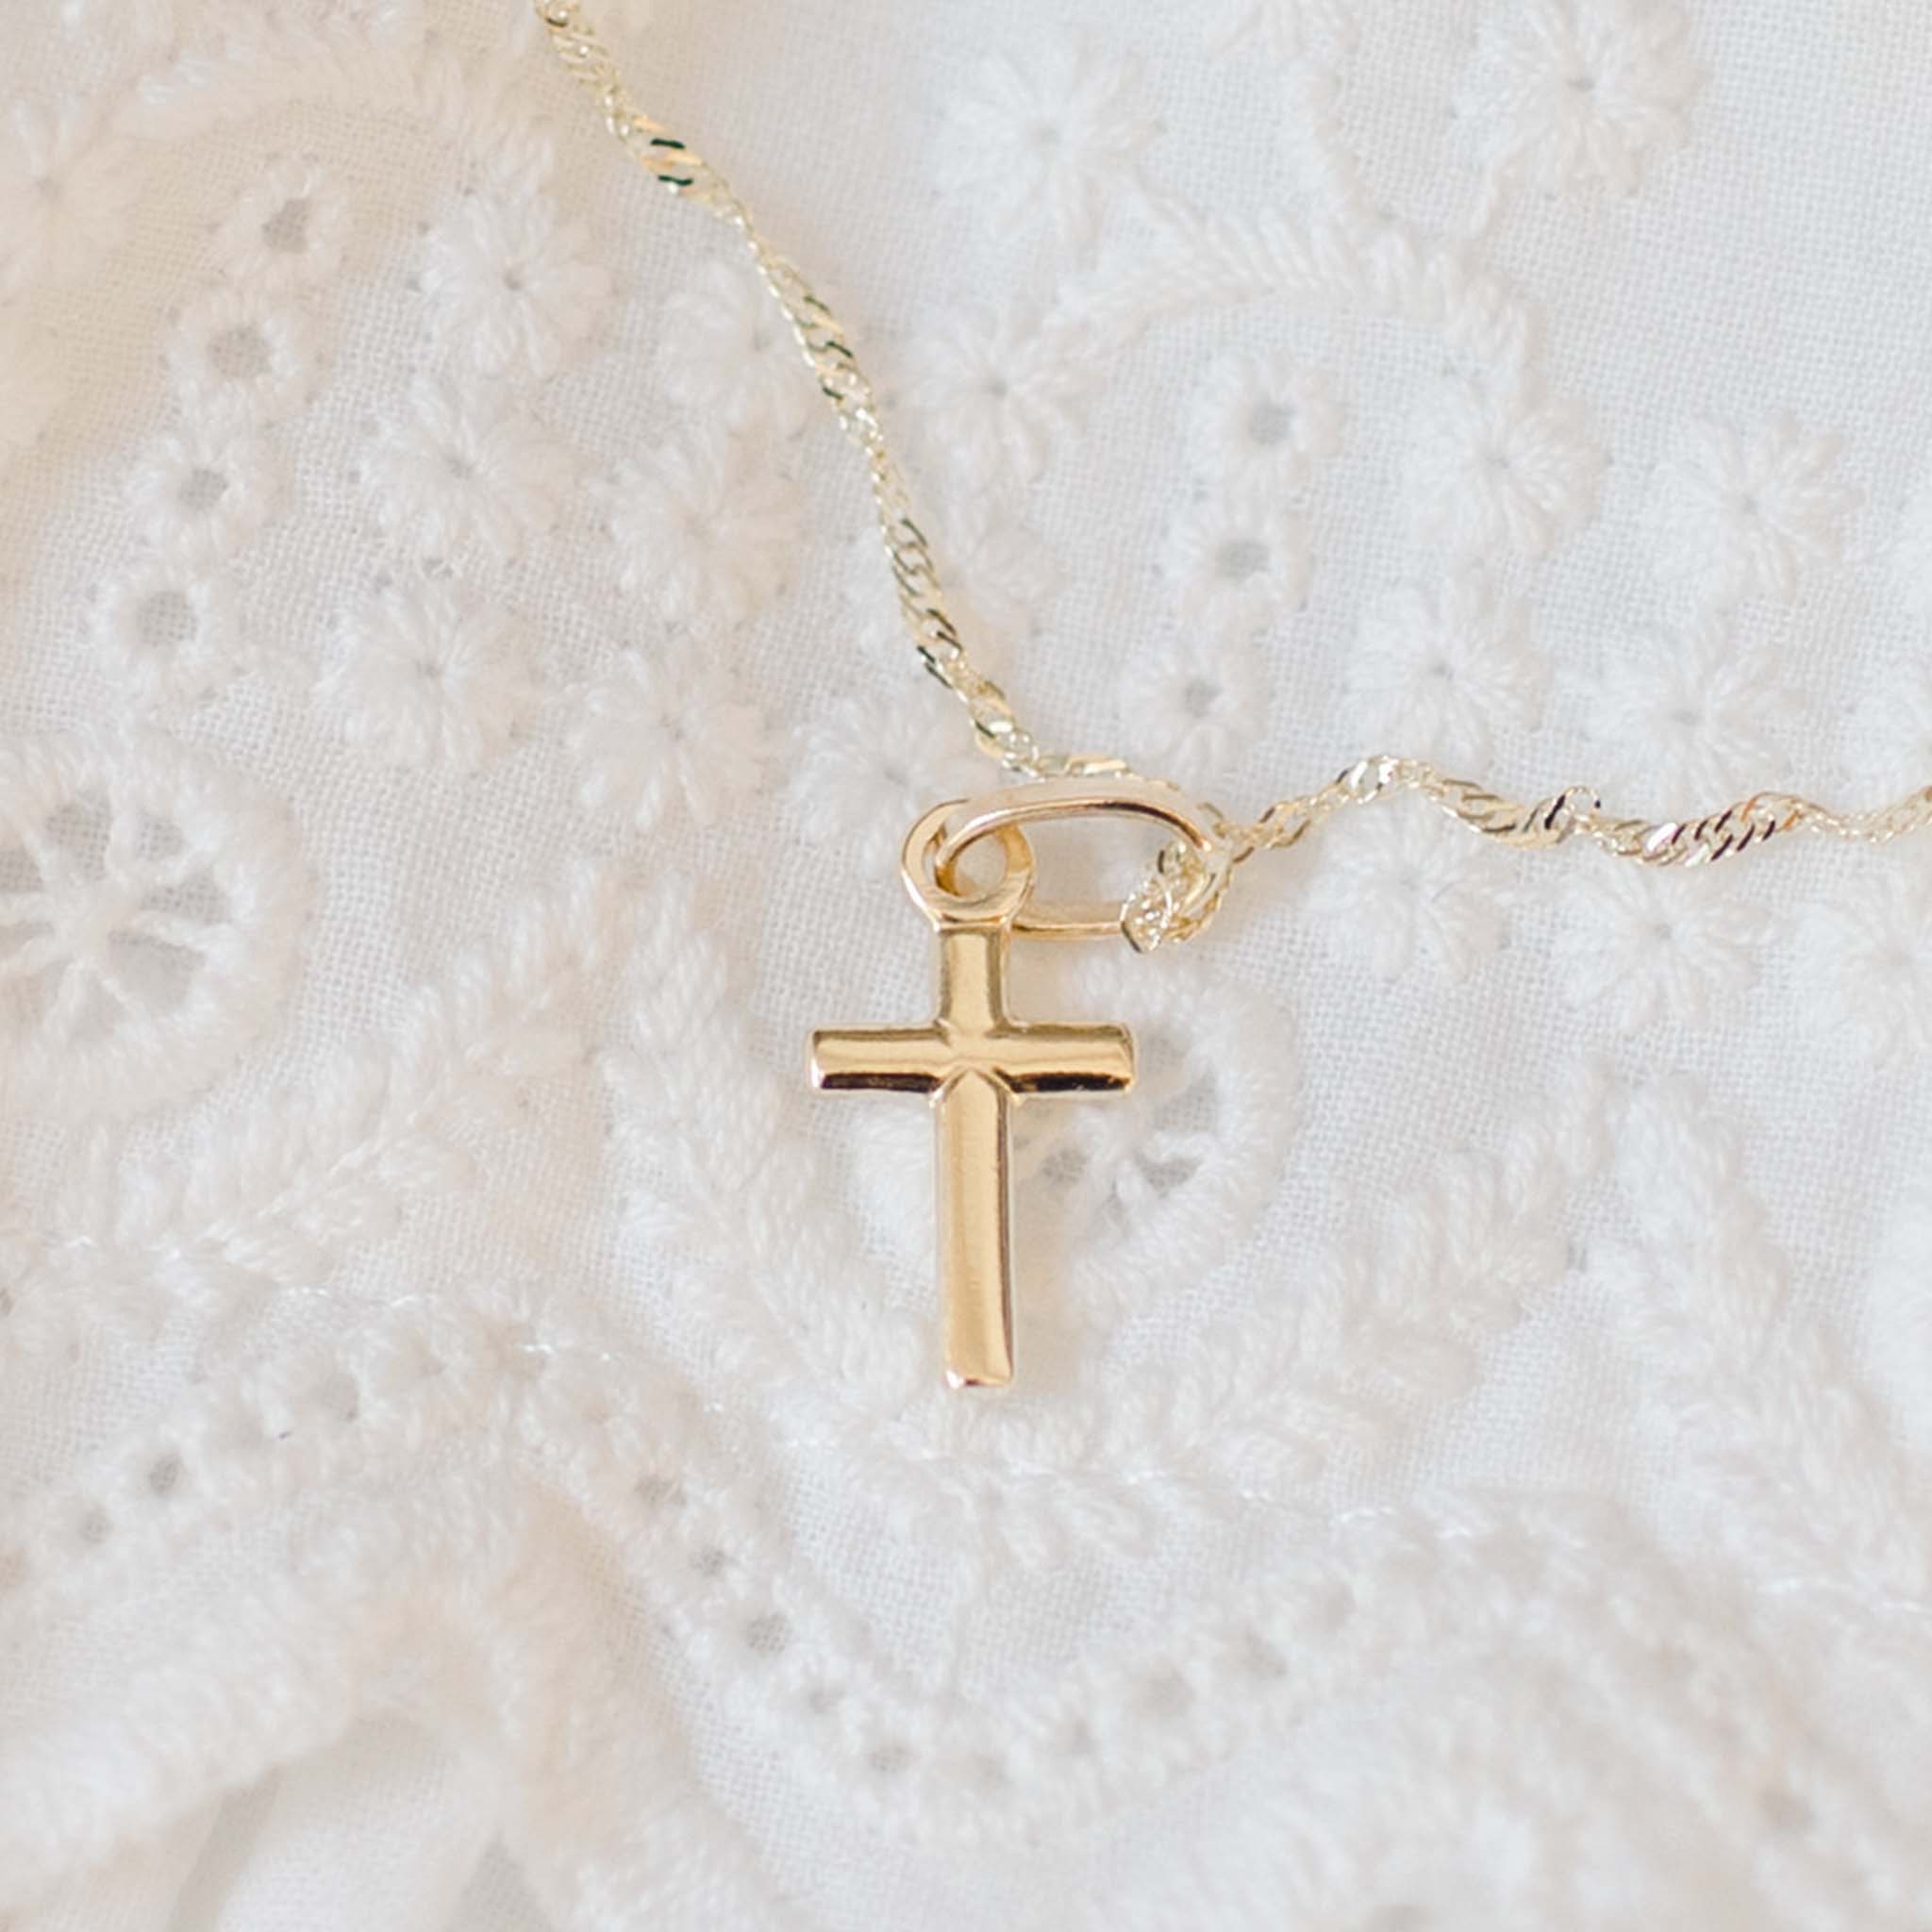 Buy Engraved Cross Necklace With Name, Cross Name Necklace, Personalized  Baptism Gift, Christening Gifts, Religious Necklace With Name for Women  Online in India - Etsy